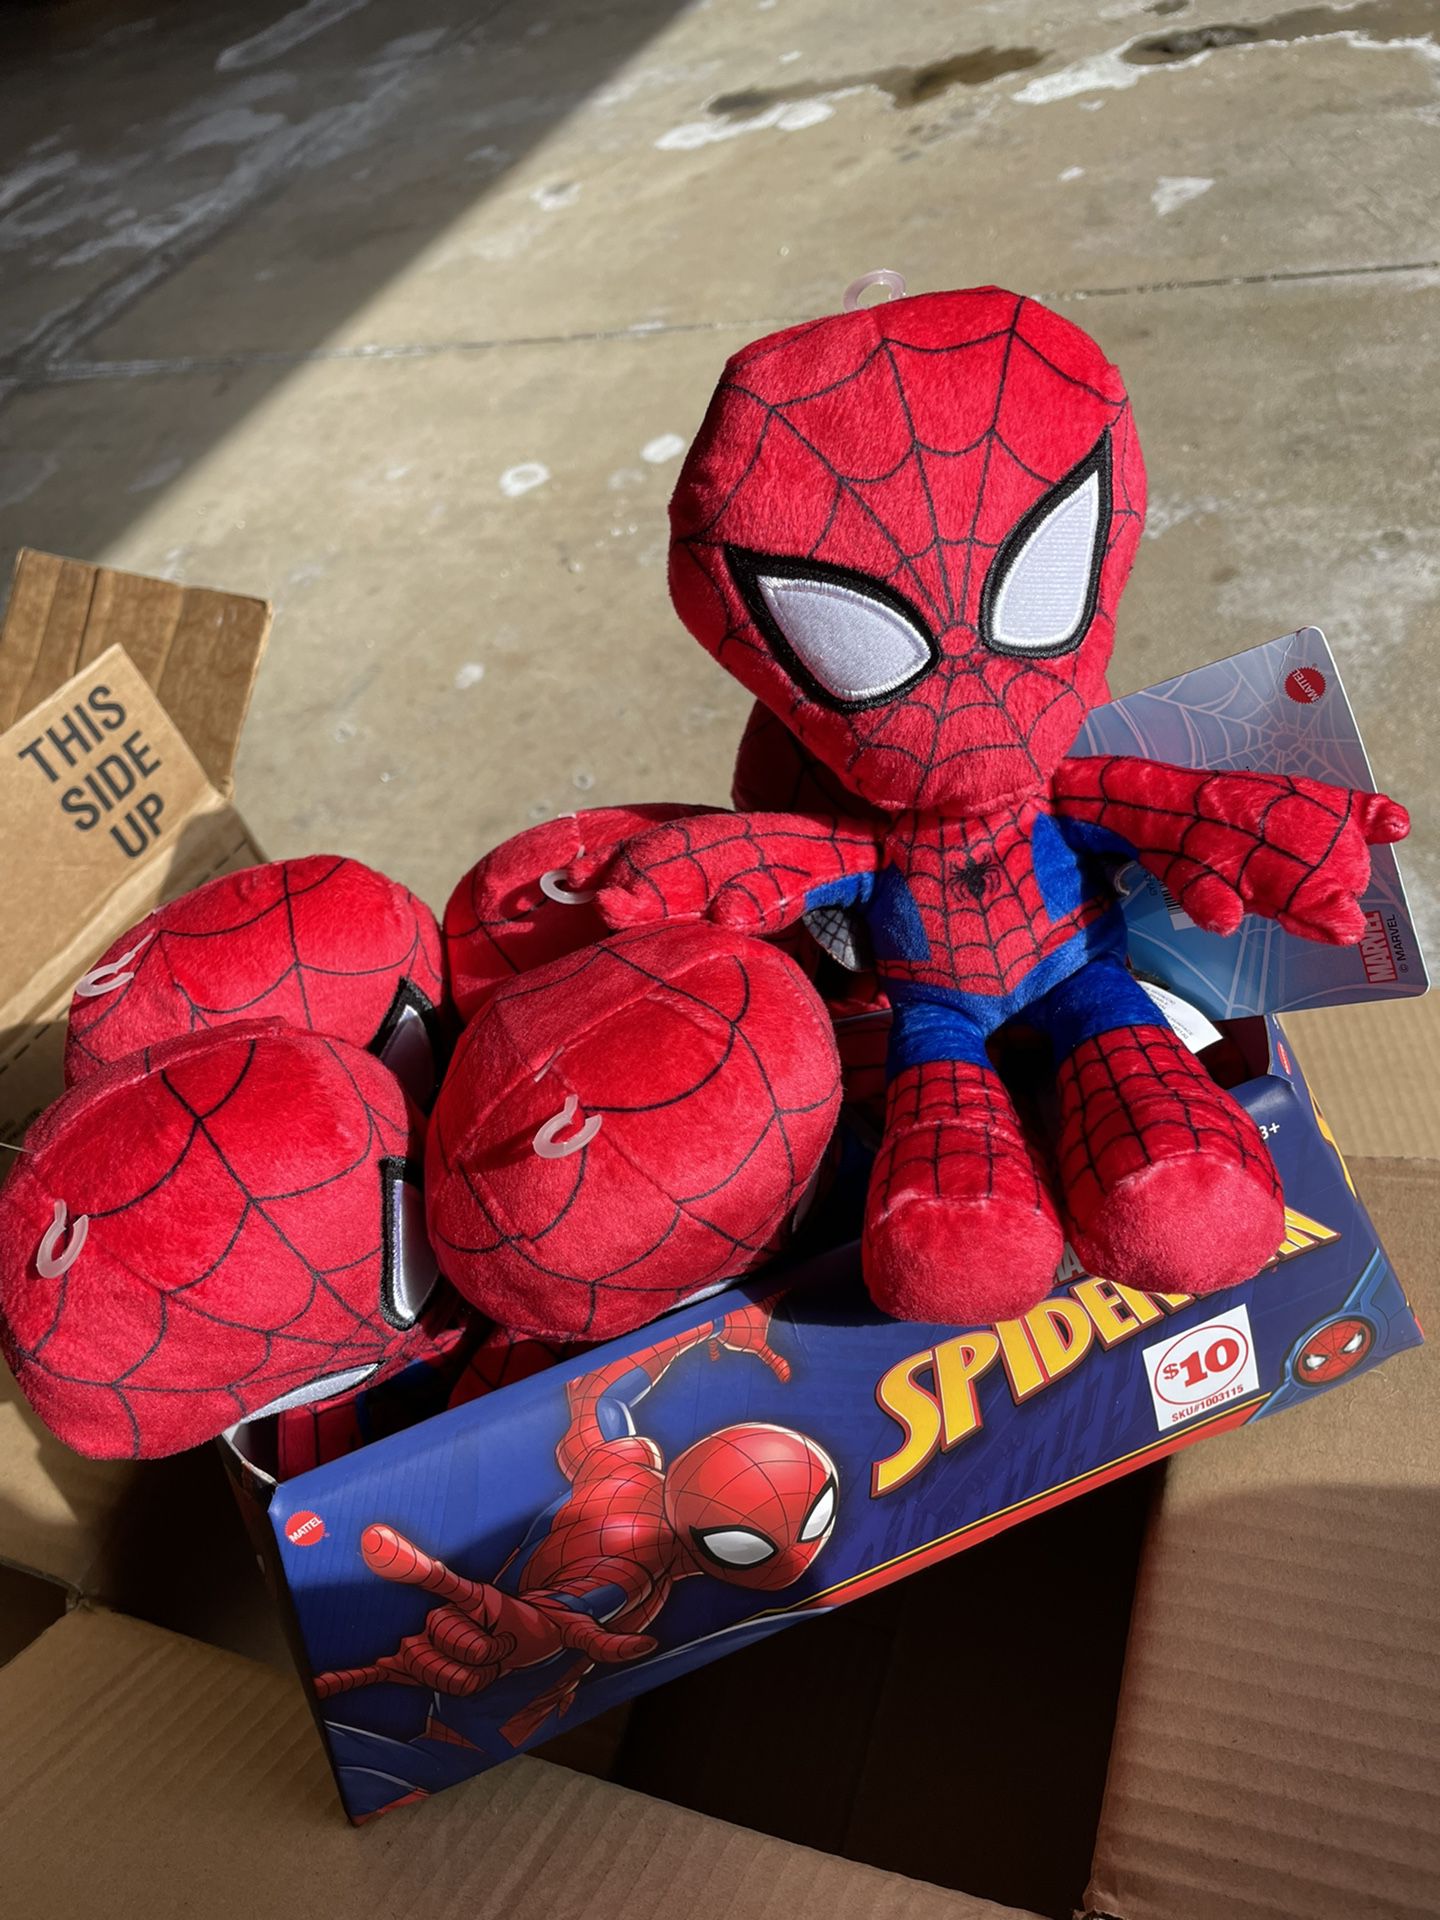 8 Inch Spider-Man Plushies - Box Of 6 for Sale in Carol Stream, IL - OfferUp